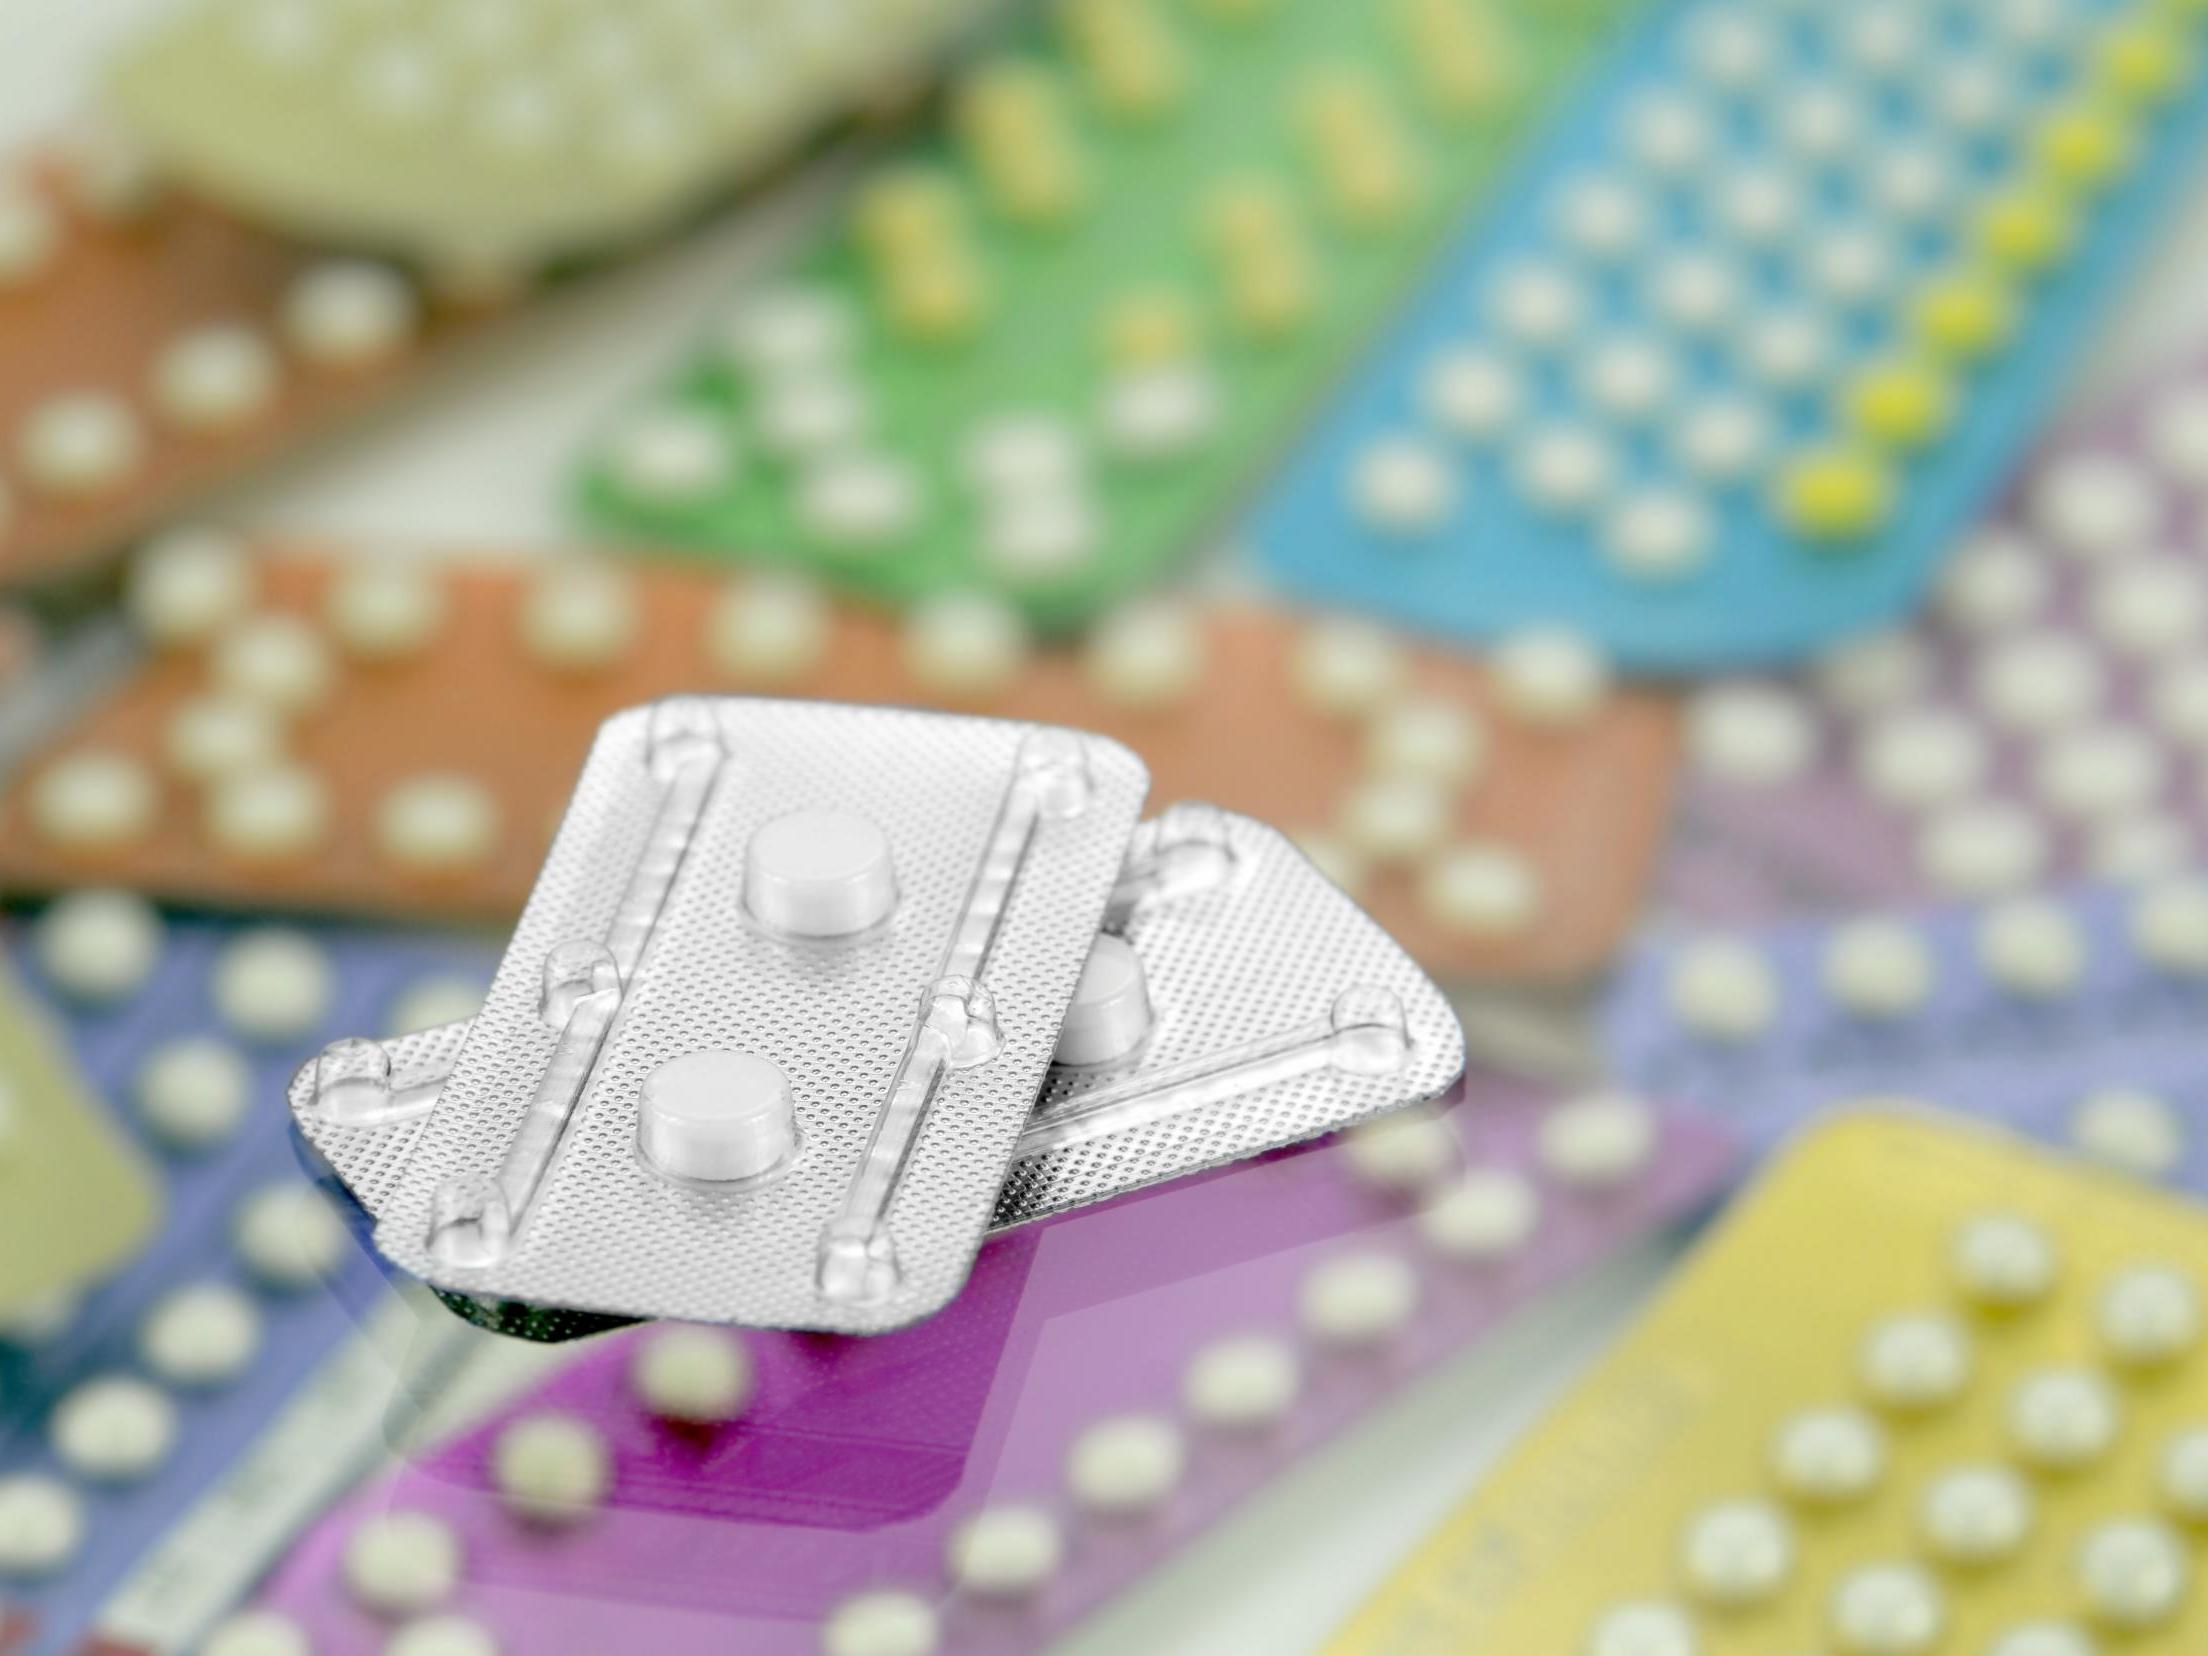 Bpas has recommended that all women keep a supply of emergency contraception at home